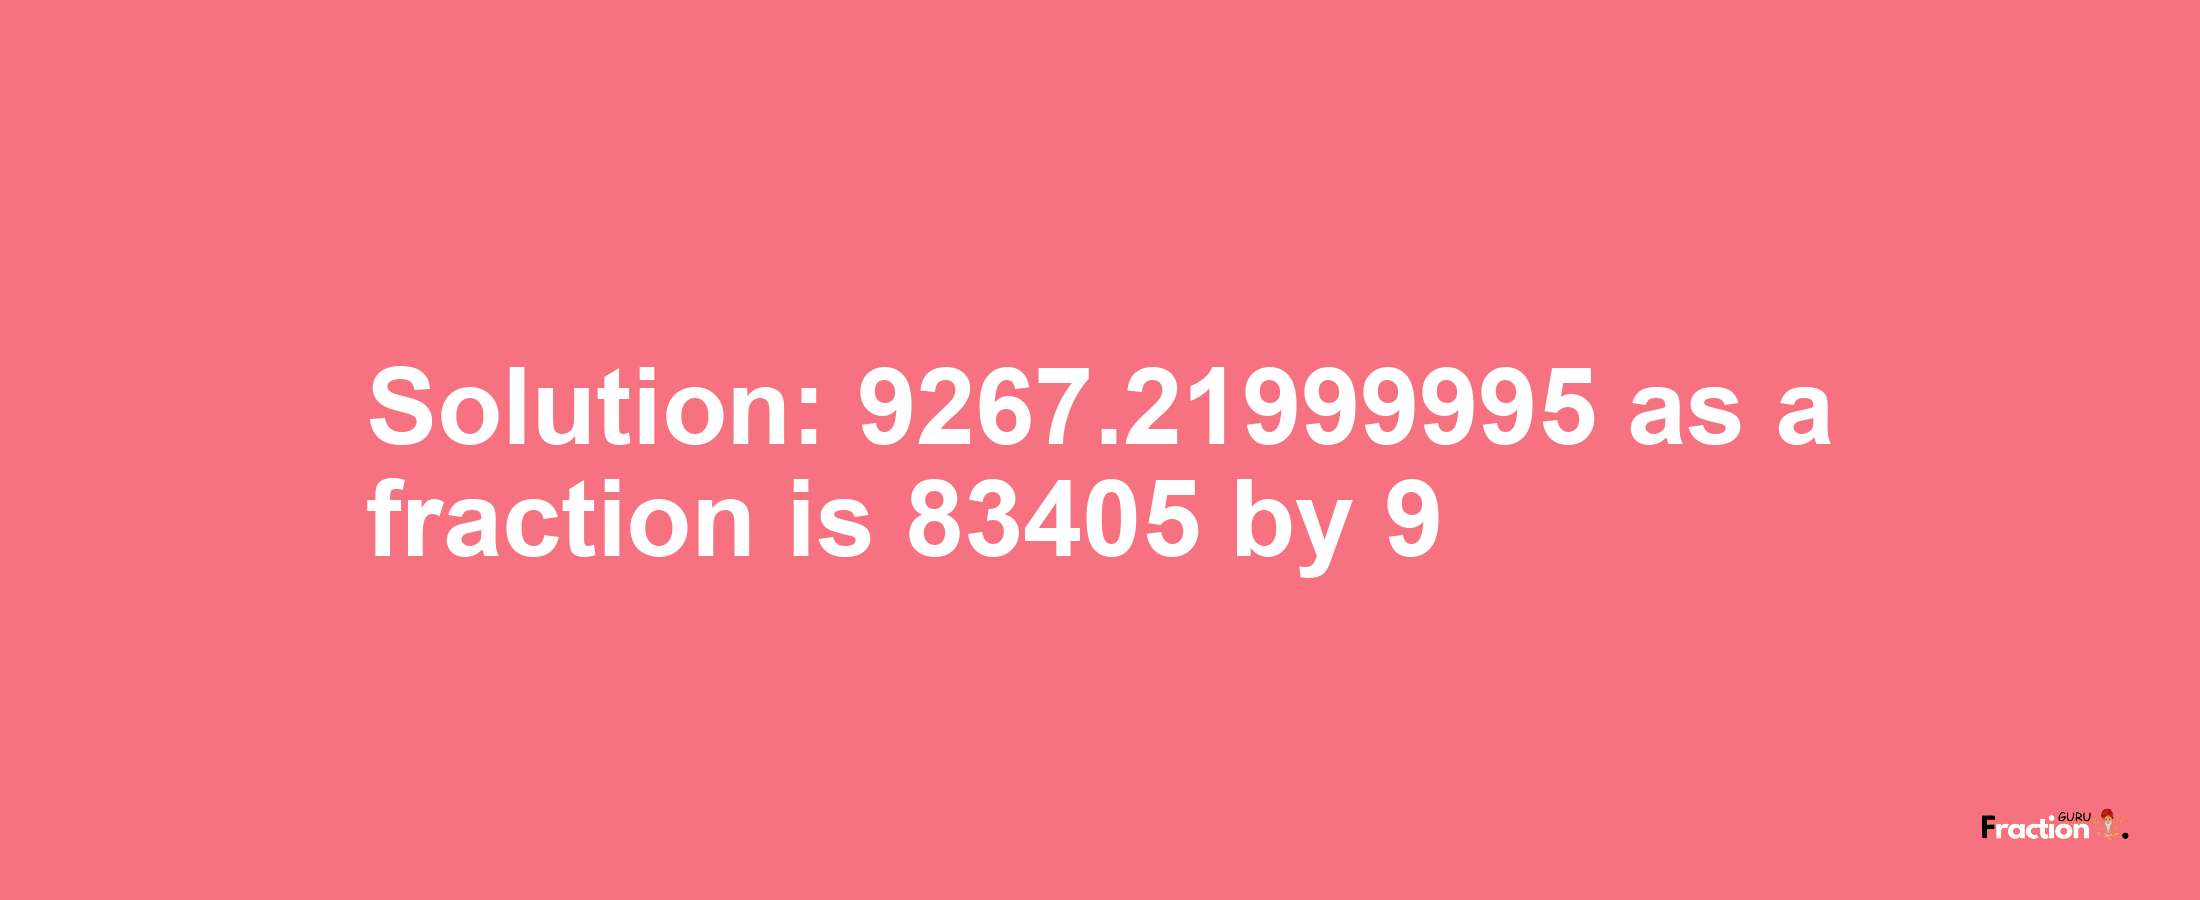 Solution:9267.21999995 as a fraction is 83405/9